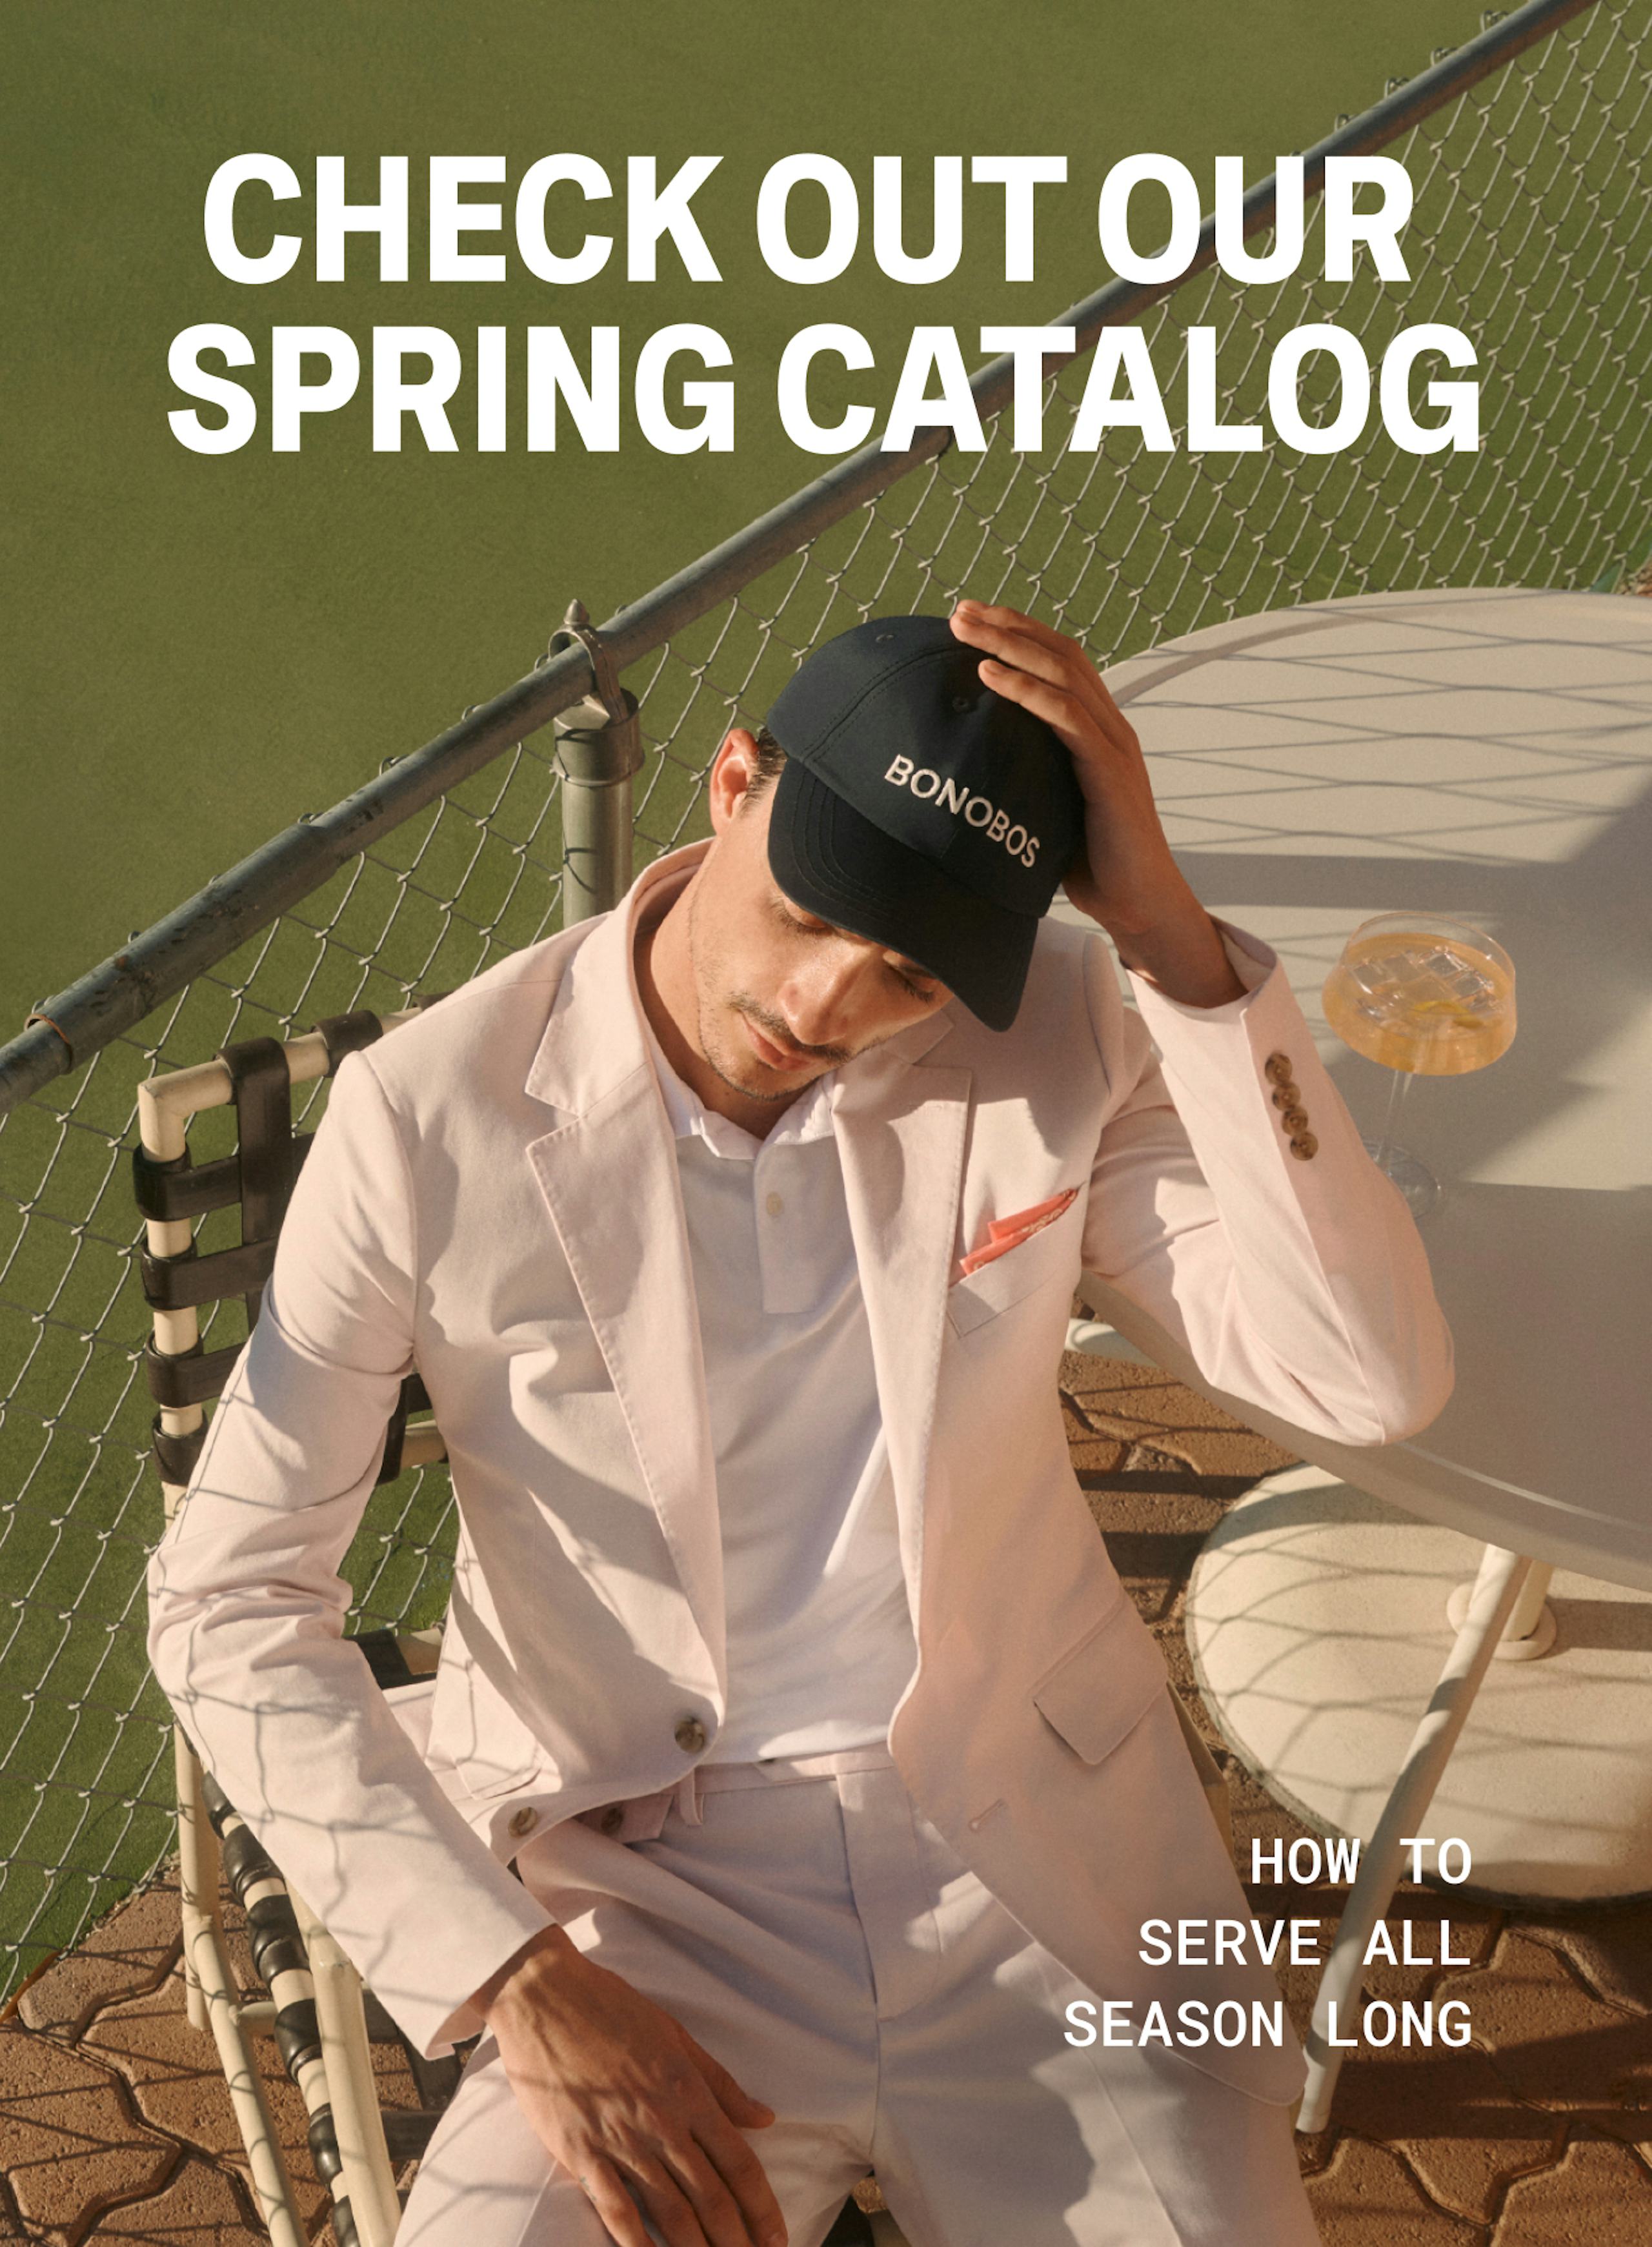 Reads: Check out Our Spring Catalog | How to Serve All Season Long